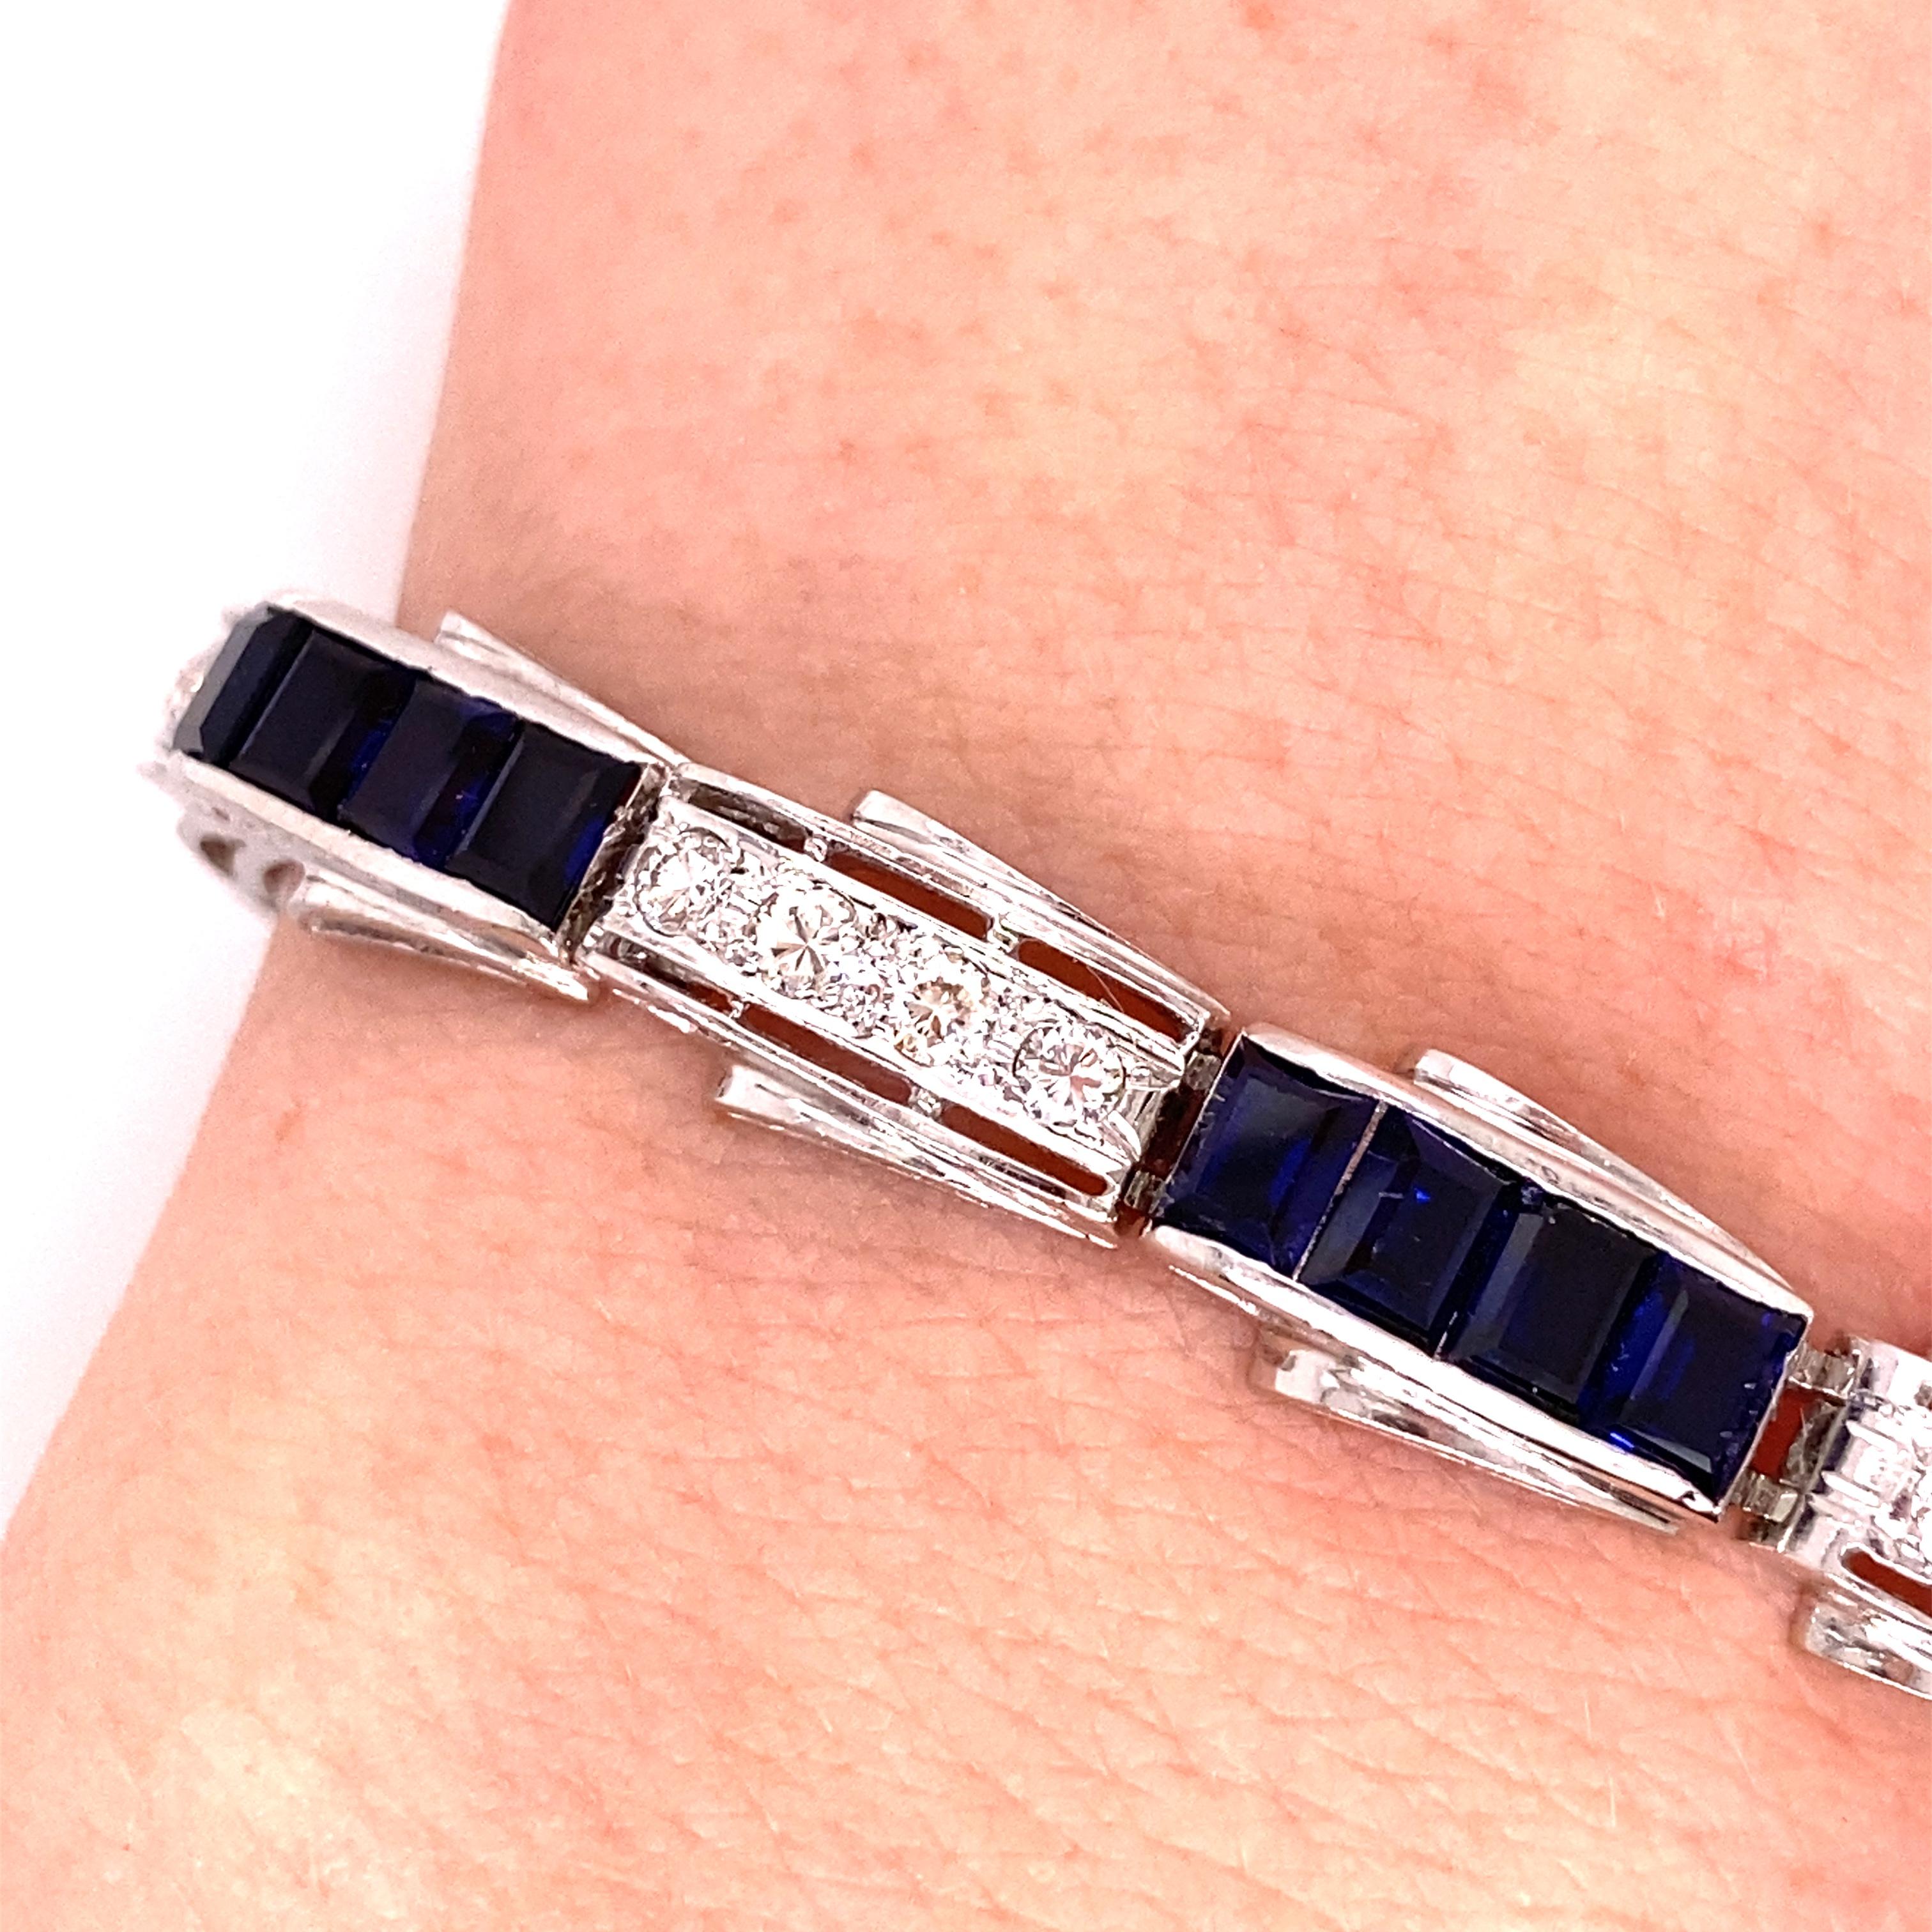 Vintage 1950's 14K White Gold Diamond and Lab Created Sapphire Bracelet - The bracelet contains 24 round brilliant diamonds with a total approximate weight 1.50ct. The diamonds are G-I color VS-SI clarity. There are 24 baguette lab created sapphires